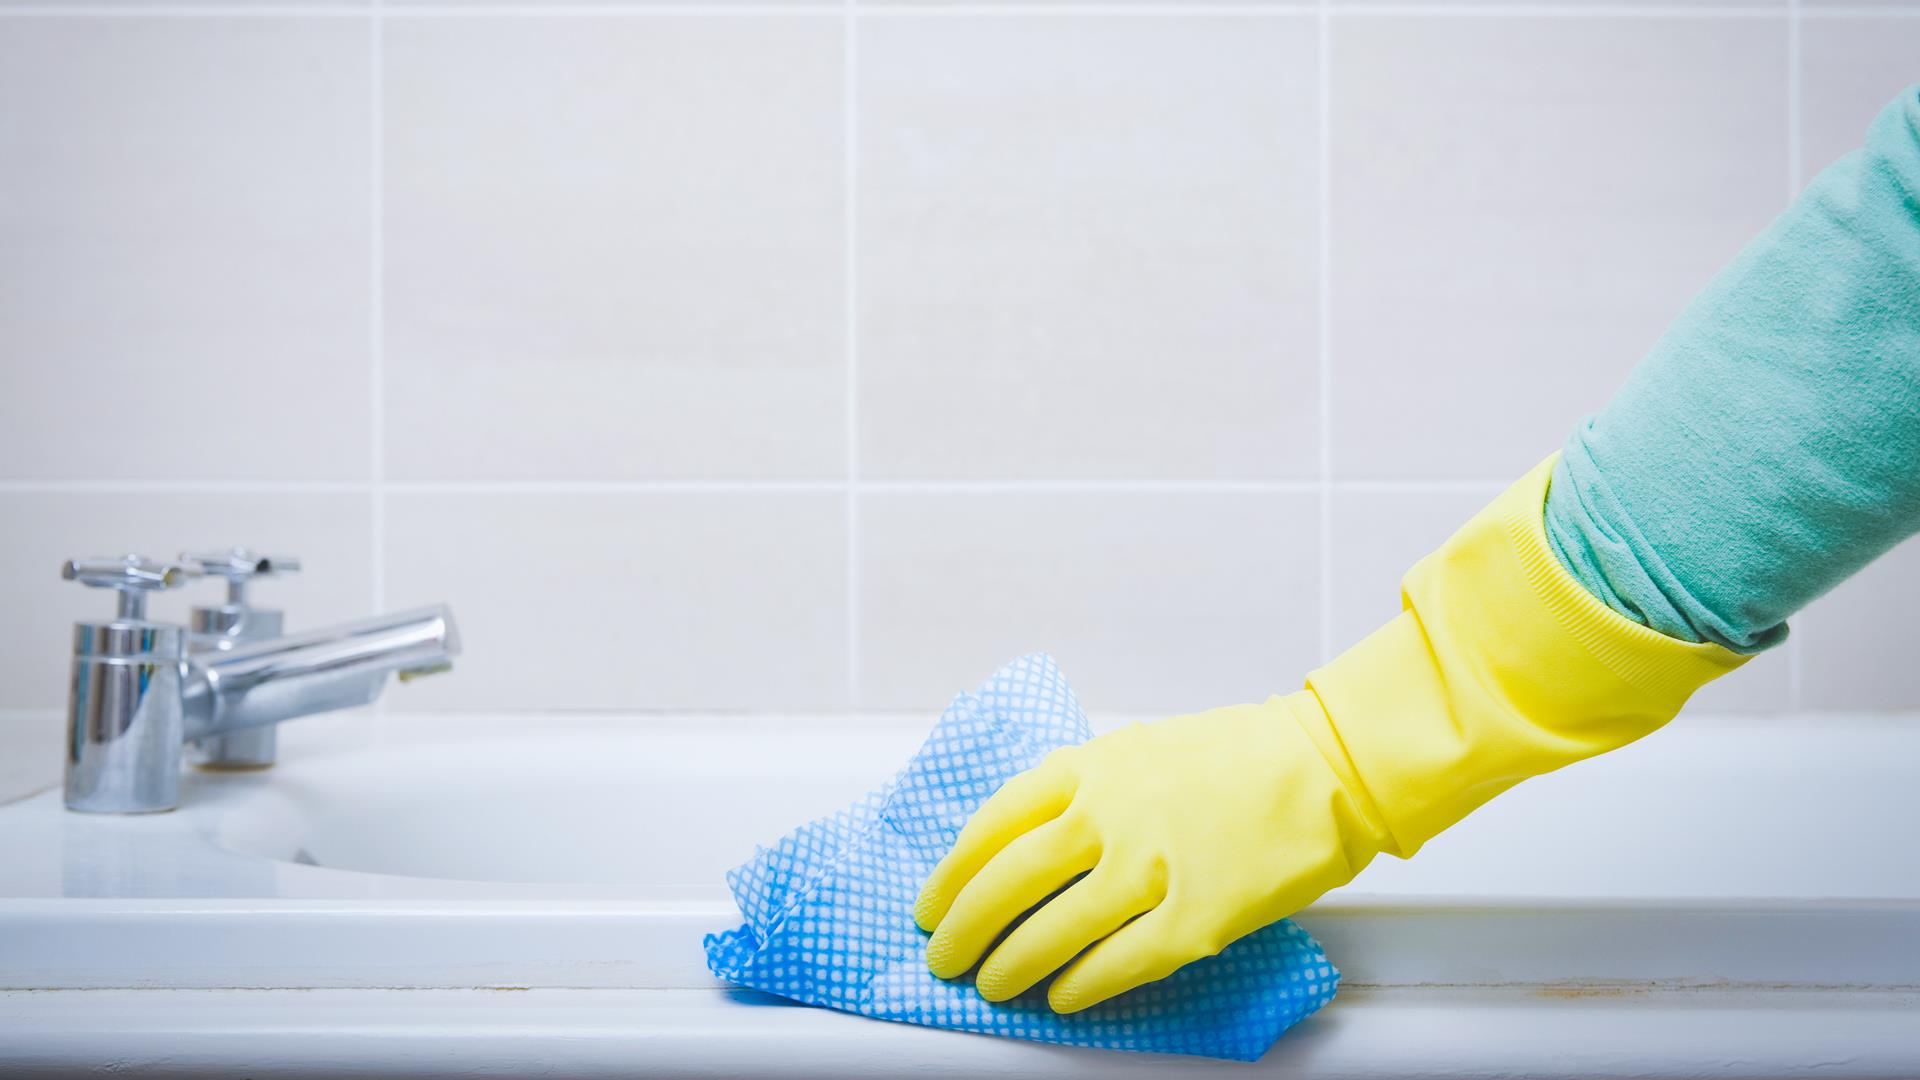 Spring cleaning: How to clean your bathroom